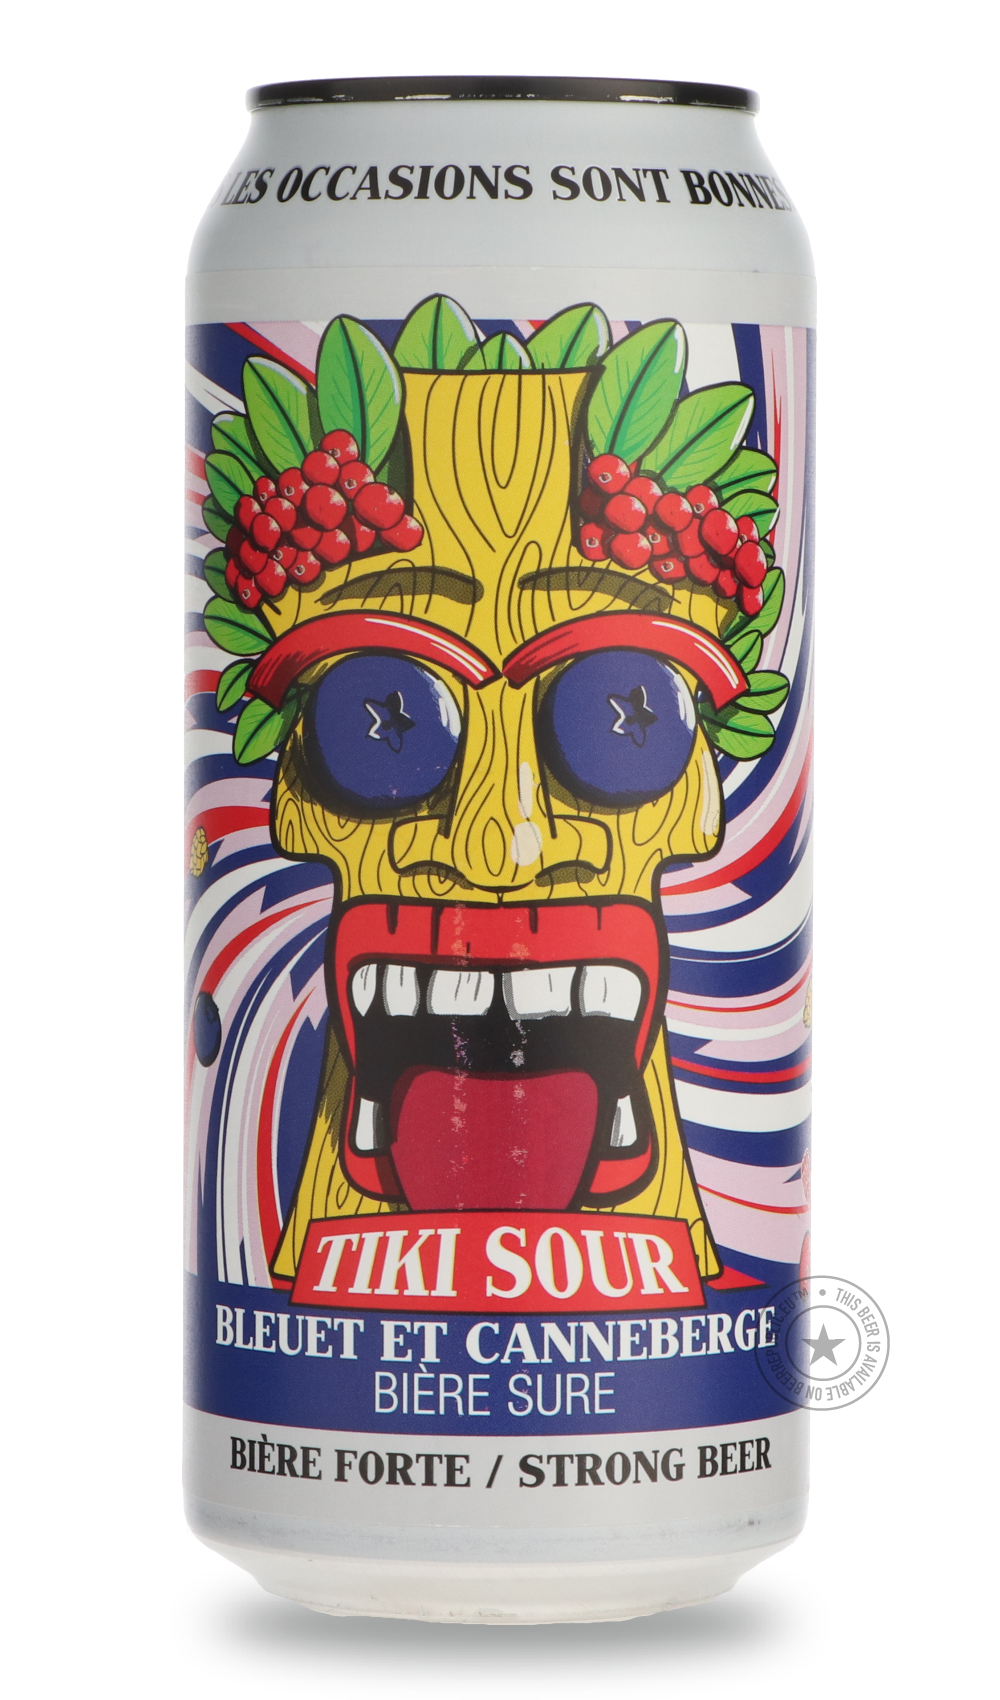 -Lagabière- Tiki Sour Bleuet Et Canneberge-Sour / Wild & Fruity- Only @ Beer Republic - The best online beer store for American & Canadian craft beer - Buy beer online from the USA and Canada - Bier online kopen - Amerikaans bier kopen - Craft beer store - Craft beer kopen - Amerikanisch bier kaufen - Bier online kaufen - Acheter biere online - IPA - Stout - Porter - New England IPA - Hazy IPA - Imperial Stout - Barrel Aged - Barrel Aged Imperial Stout - Brown - Dark beer - Blond - Blonde - Pilsner - Lager 